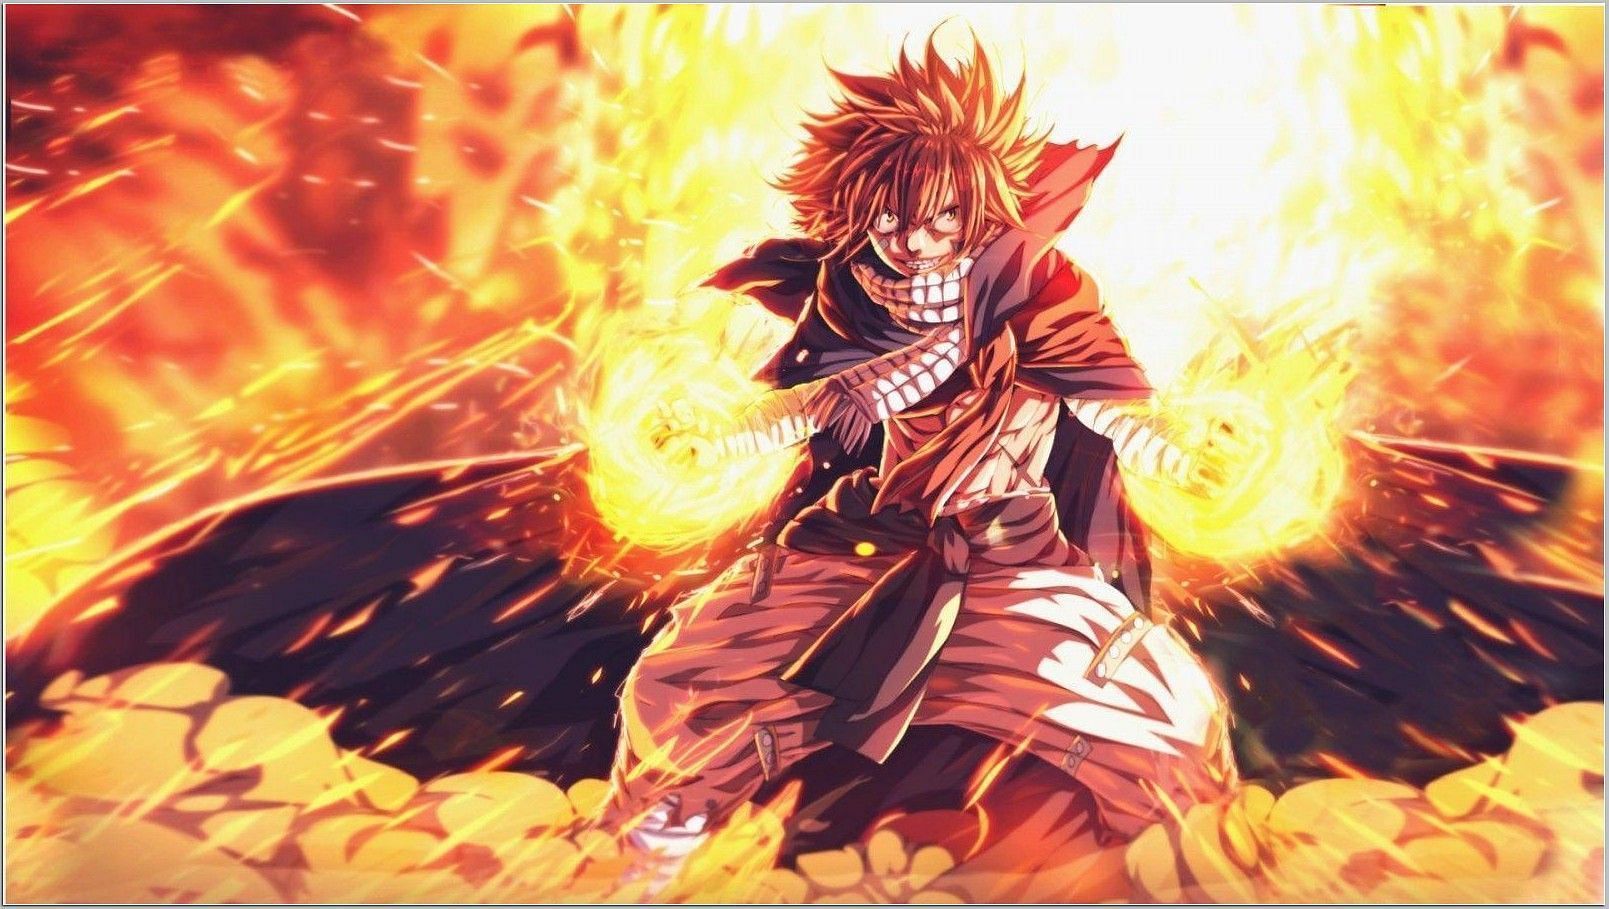 Natsu&#039;s Dragon Slayer Spell, as seen in Fairy Tail (image via A1 Pictures studio)